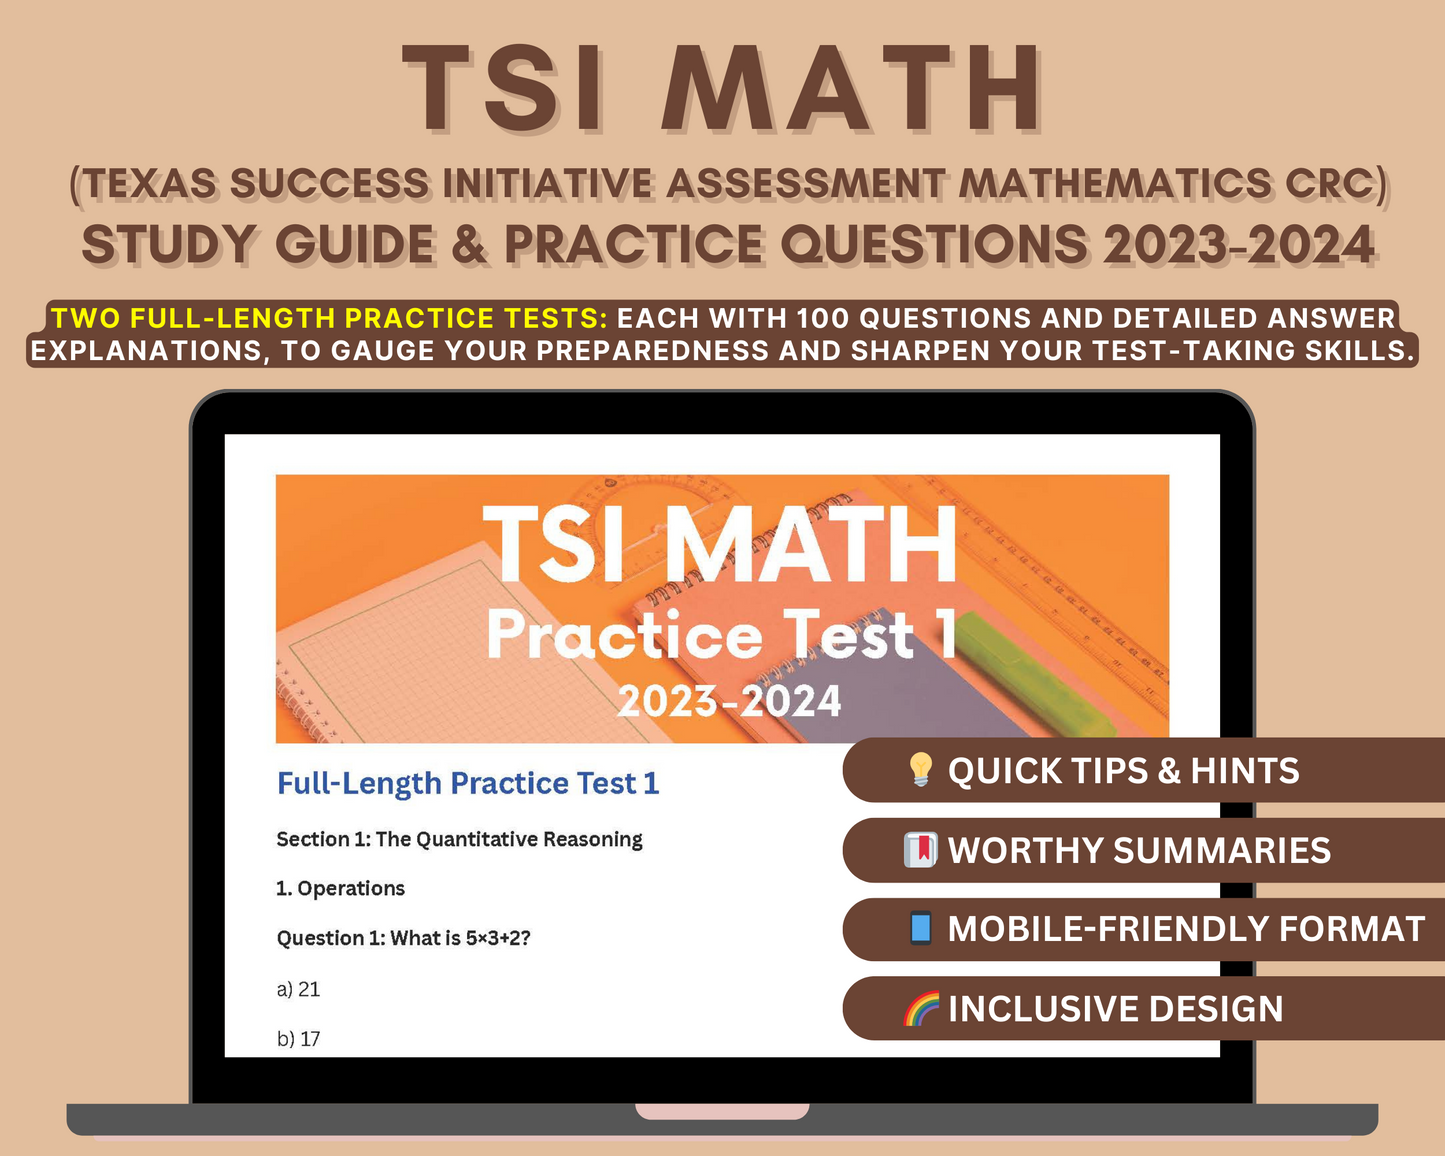 TSI Math Study Guide 2023-2024: In-Depth Content Review & Practice Tests for Texas Success Initiative Assessment Test